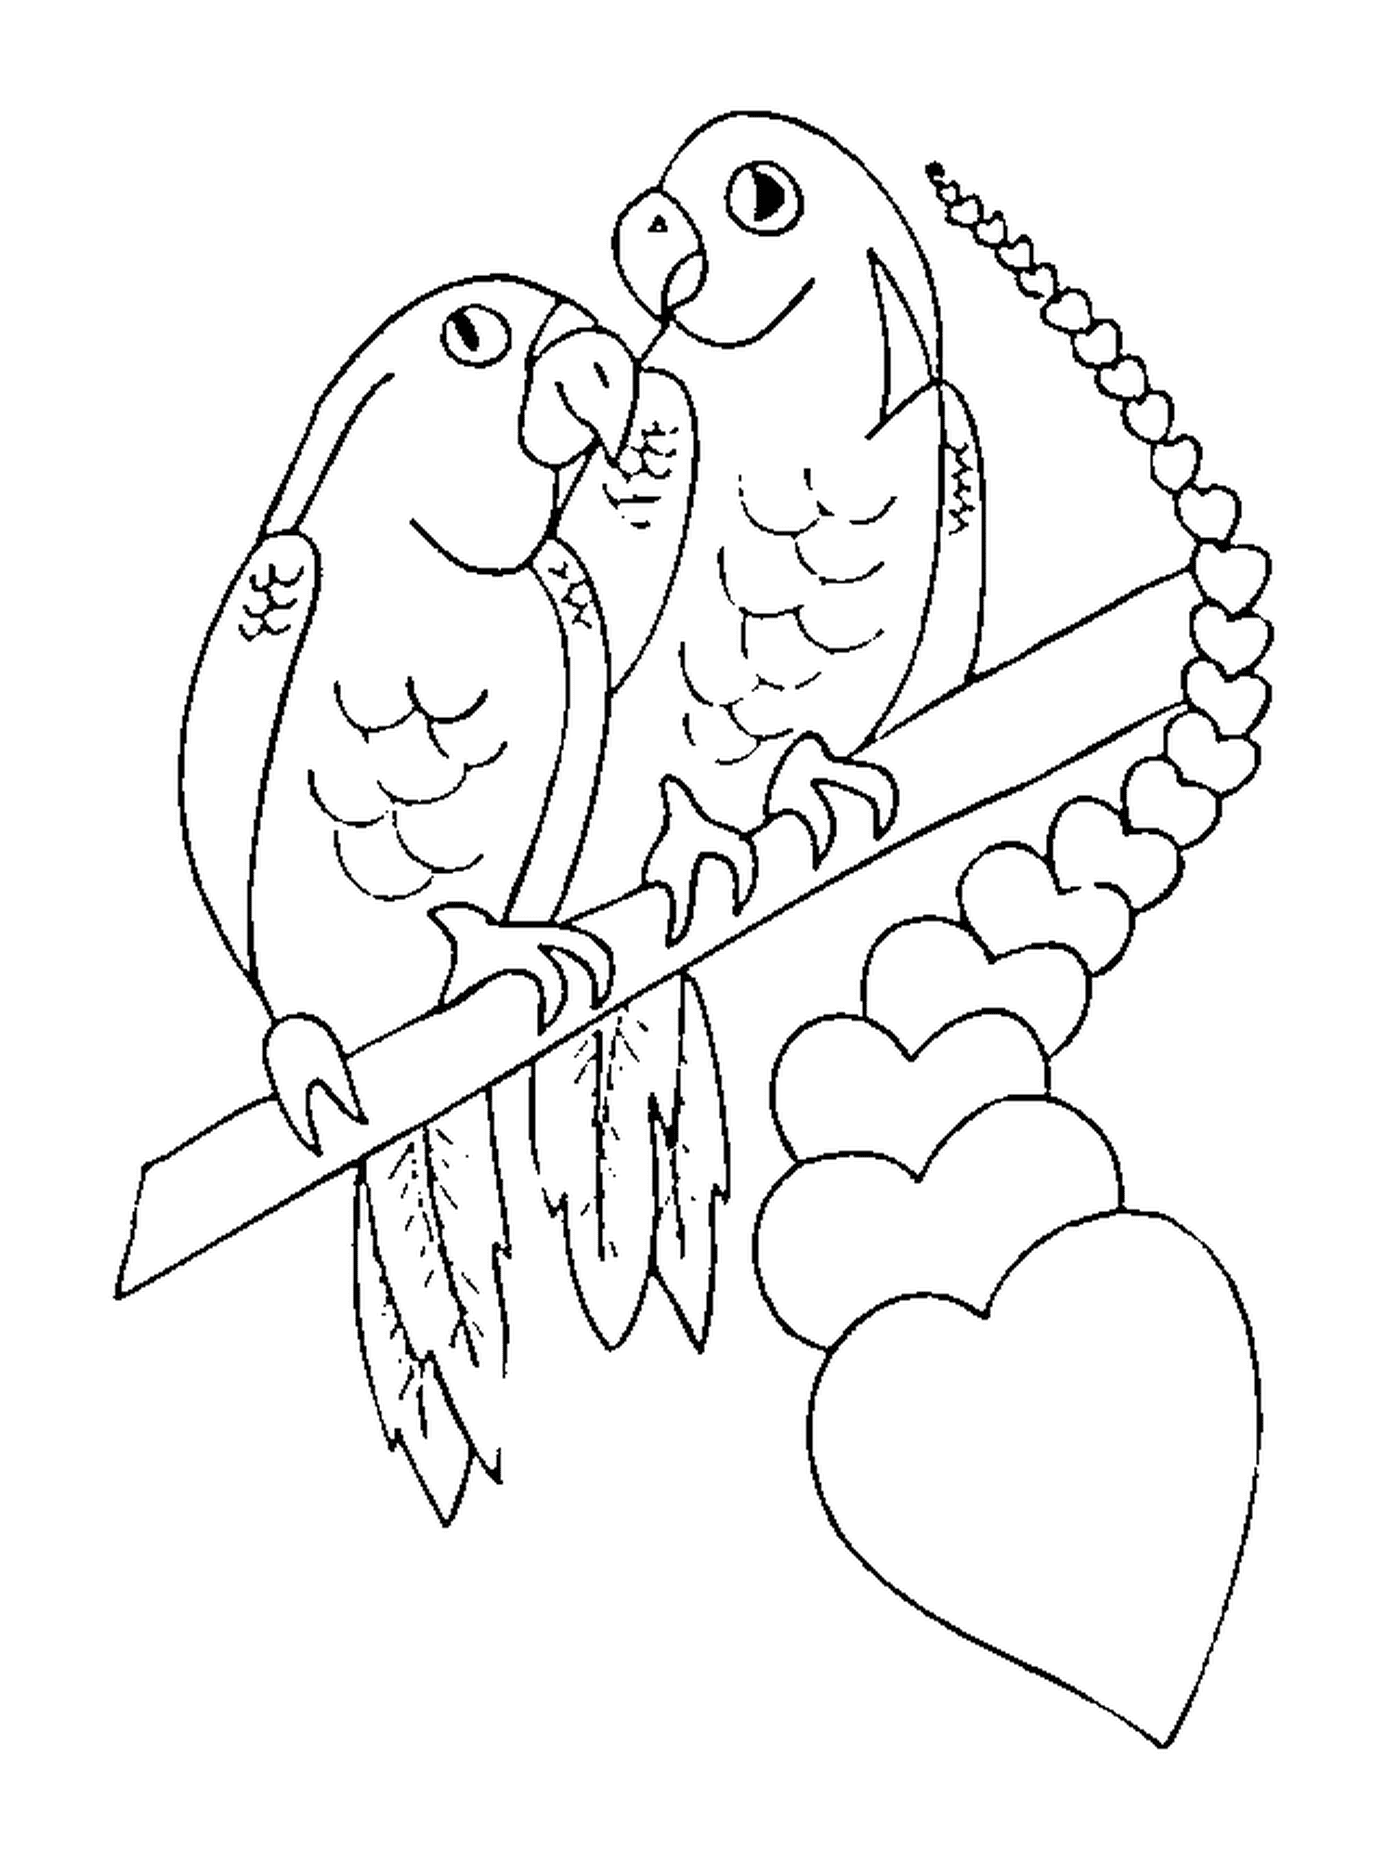  Two parrots and hearts 